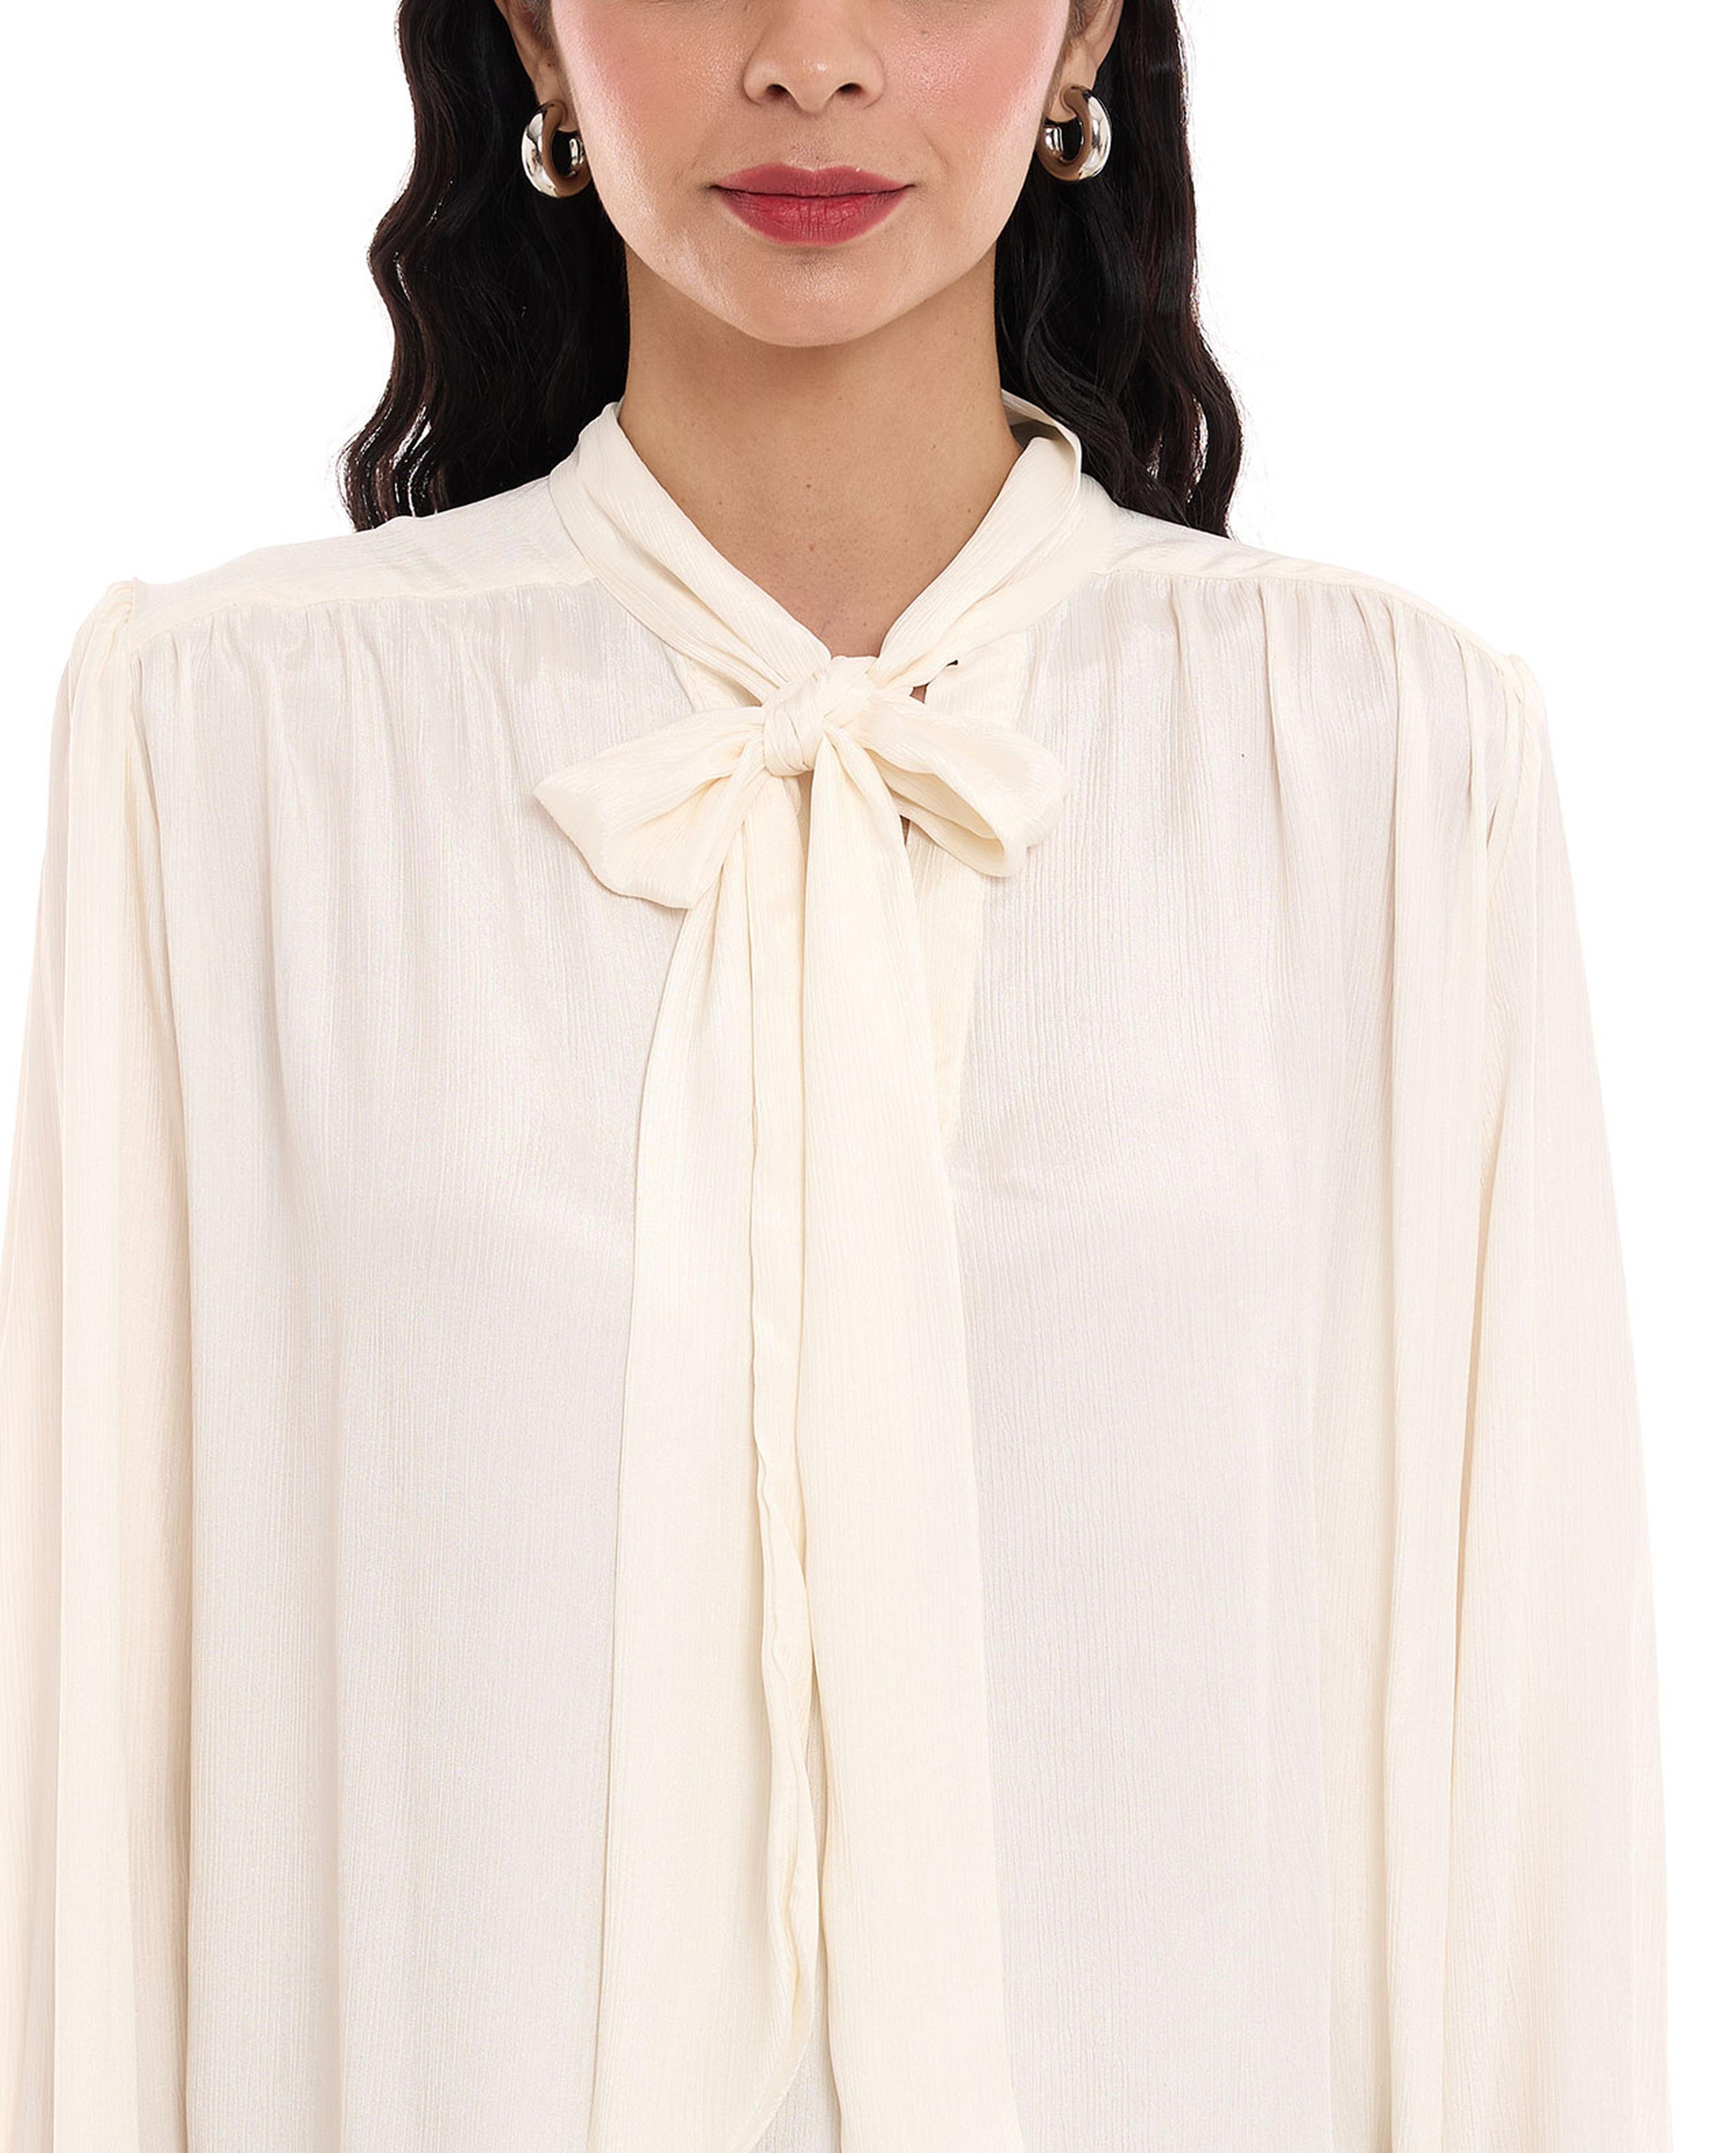 Textured Top with Tie-Up Neck and Long Sleeves